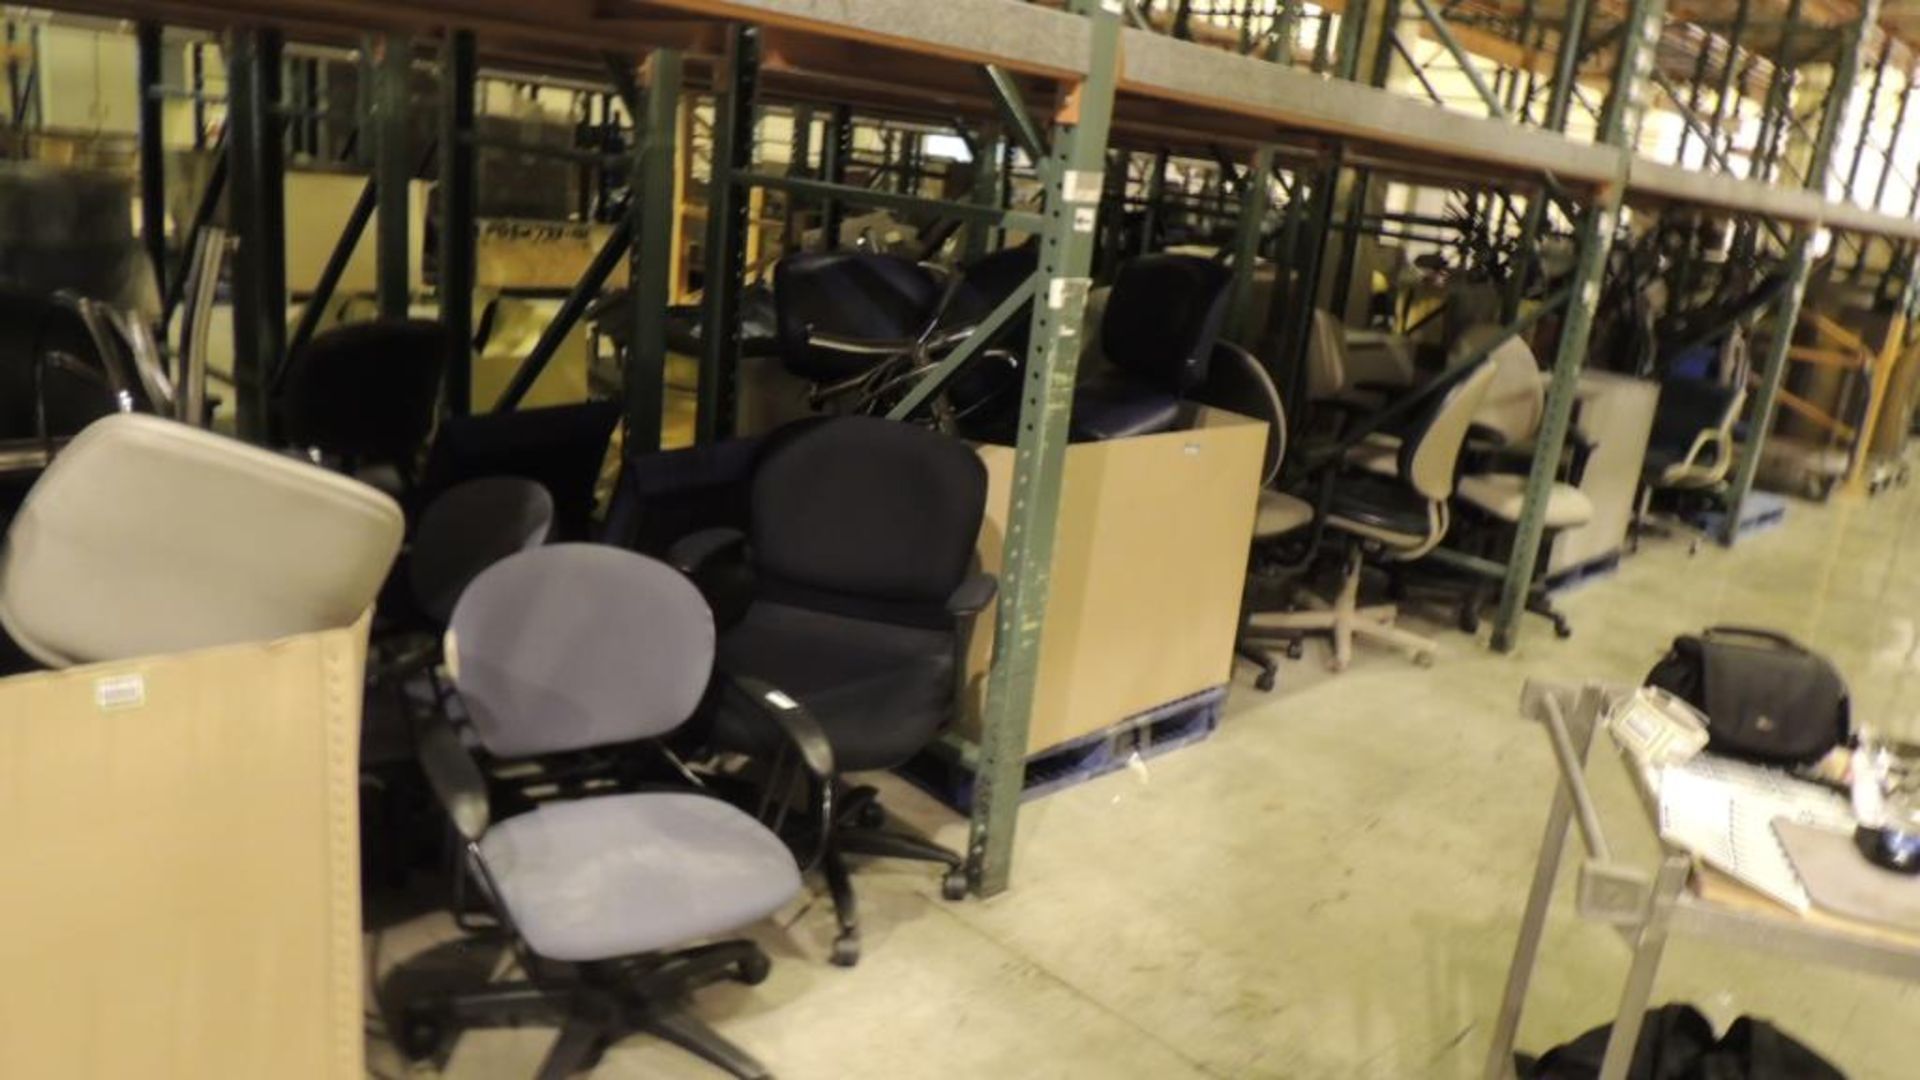 Chairs; Lot: approximately (28)office chairs and one metal desk. HIT# 2192727. Loc: 2101. Asset